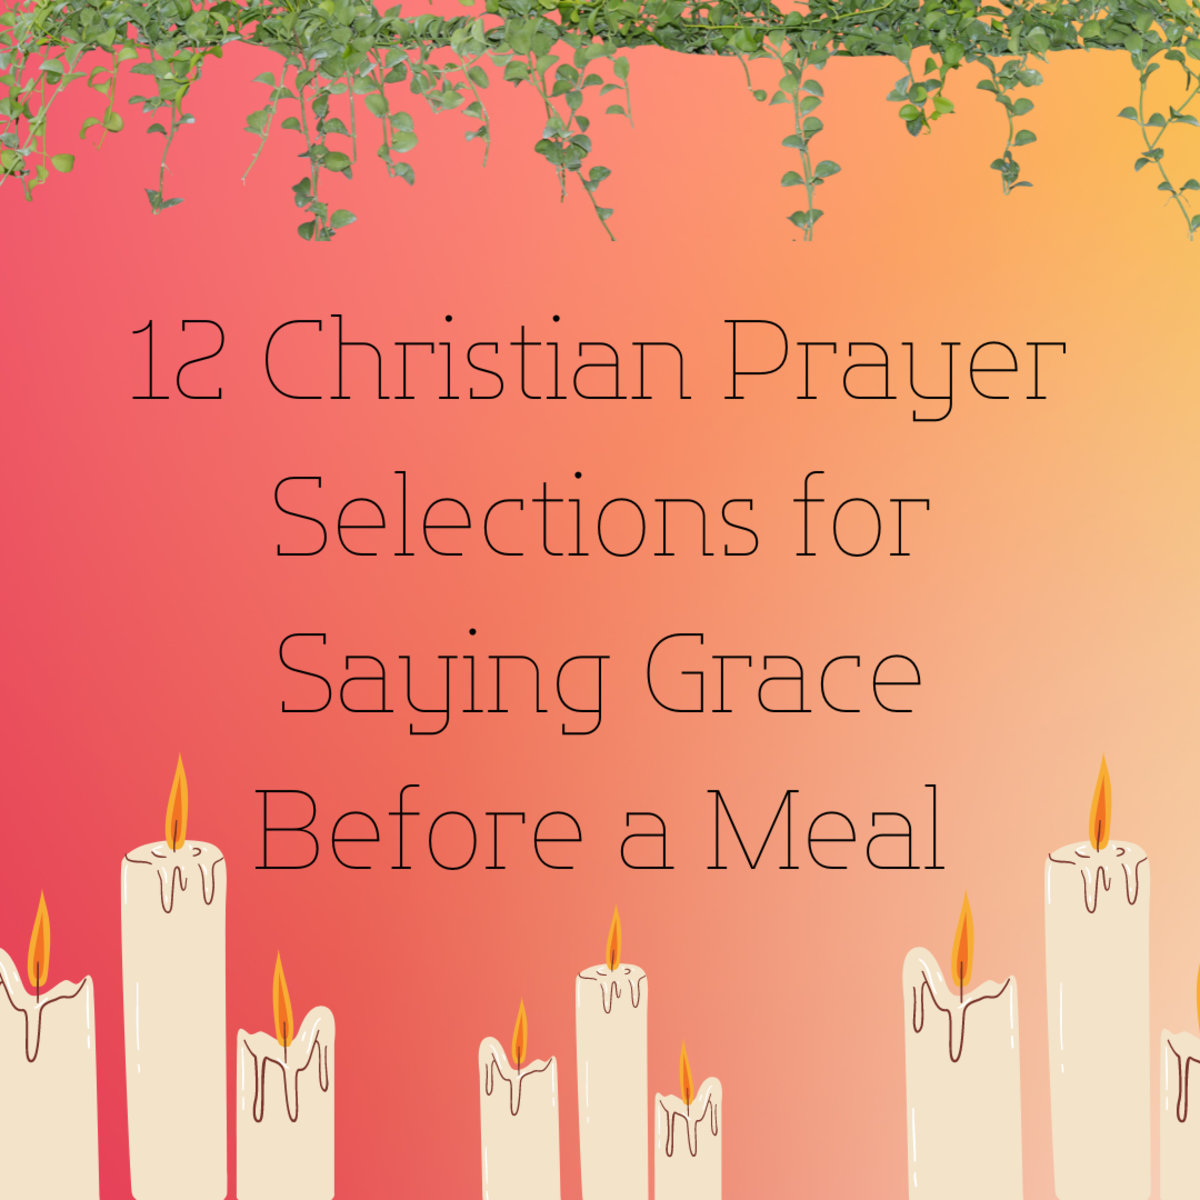 12 Christian Prayer Selections for Saying Grace Before a Meal